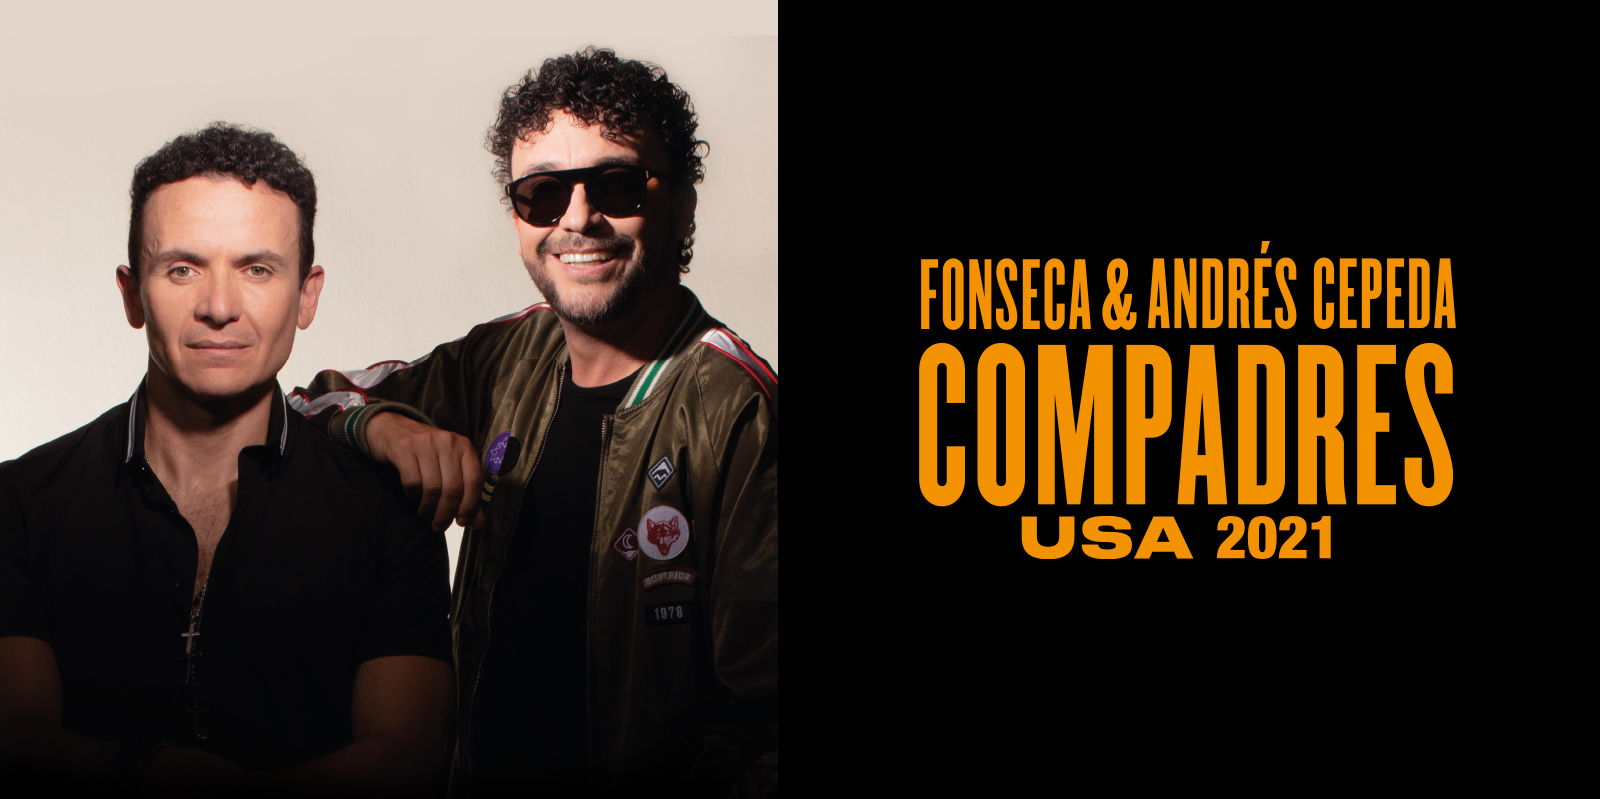 Fonseca and Andrés Cepeda promotional image